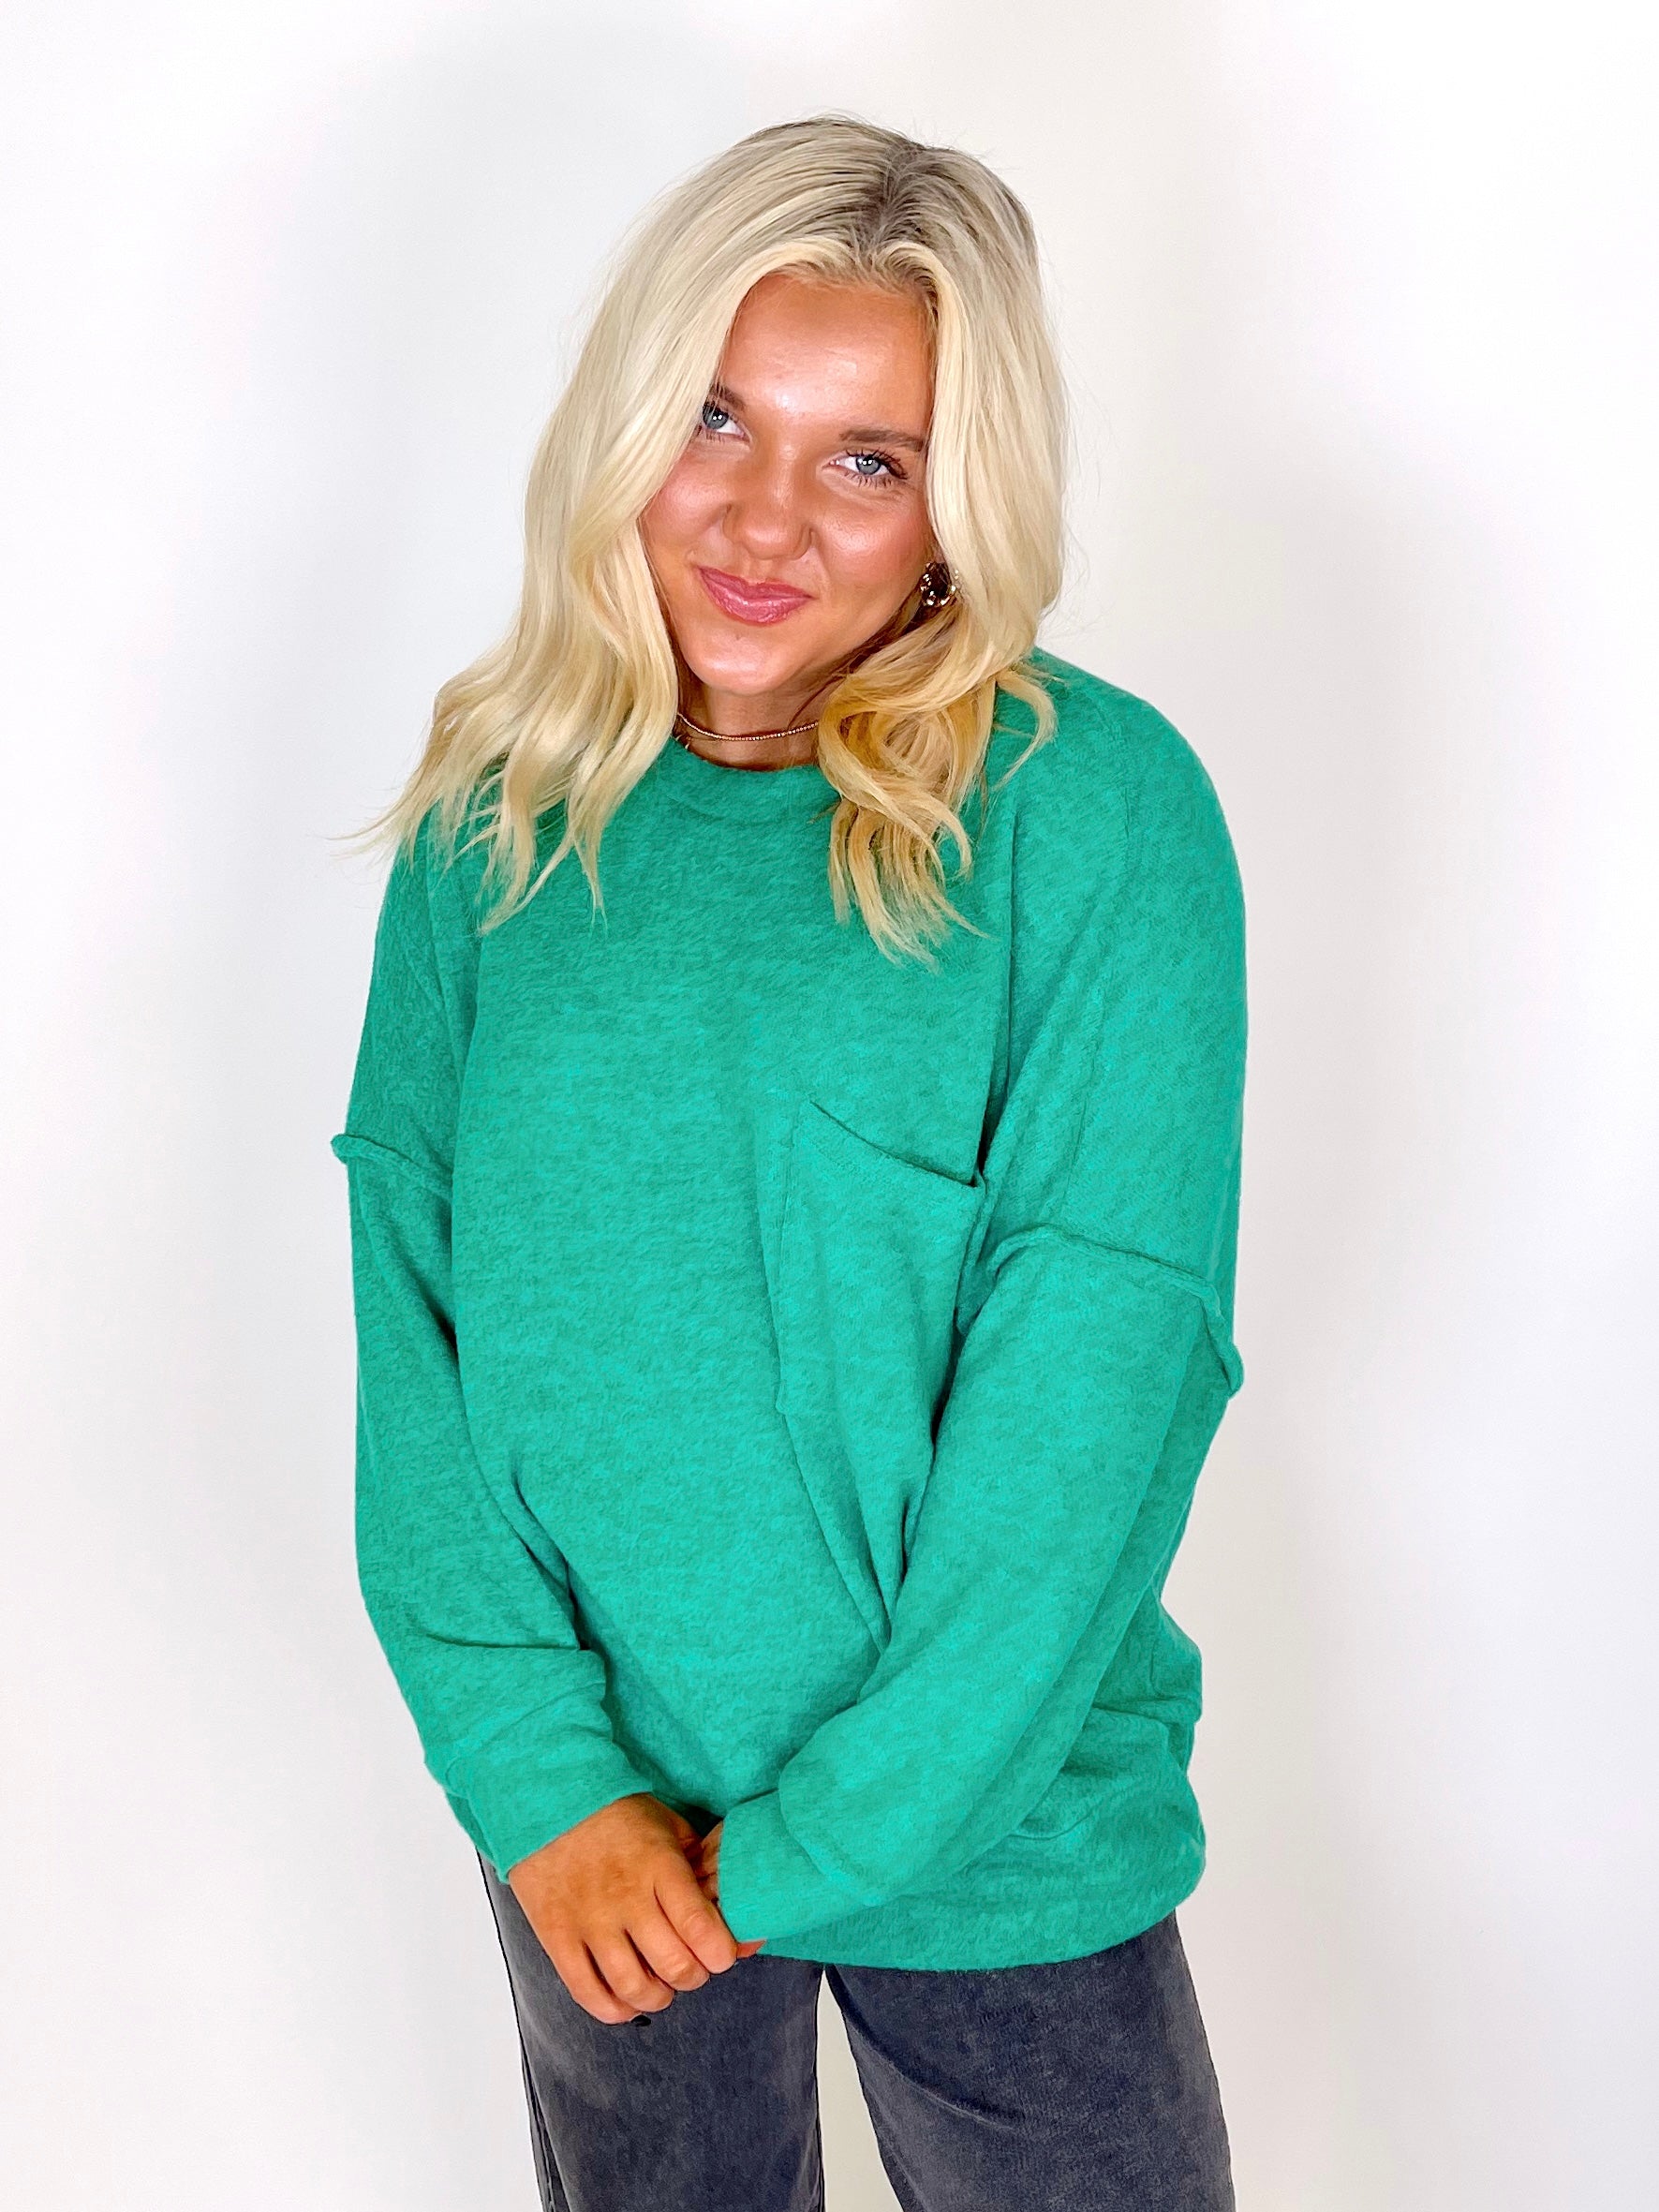 The Madison Sweater | DOORBUSTER-Sweaters-Zenana-The Village Shoppe, Women’s Fashion Boutique, Shop Online and In Store - Located in Muscle Shoals, AL.